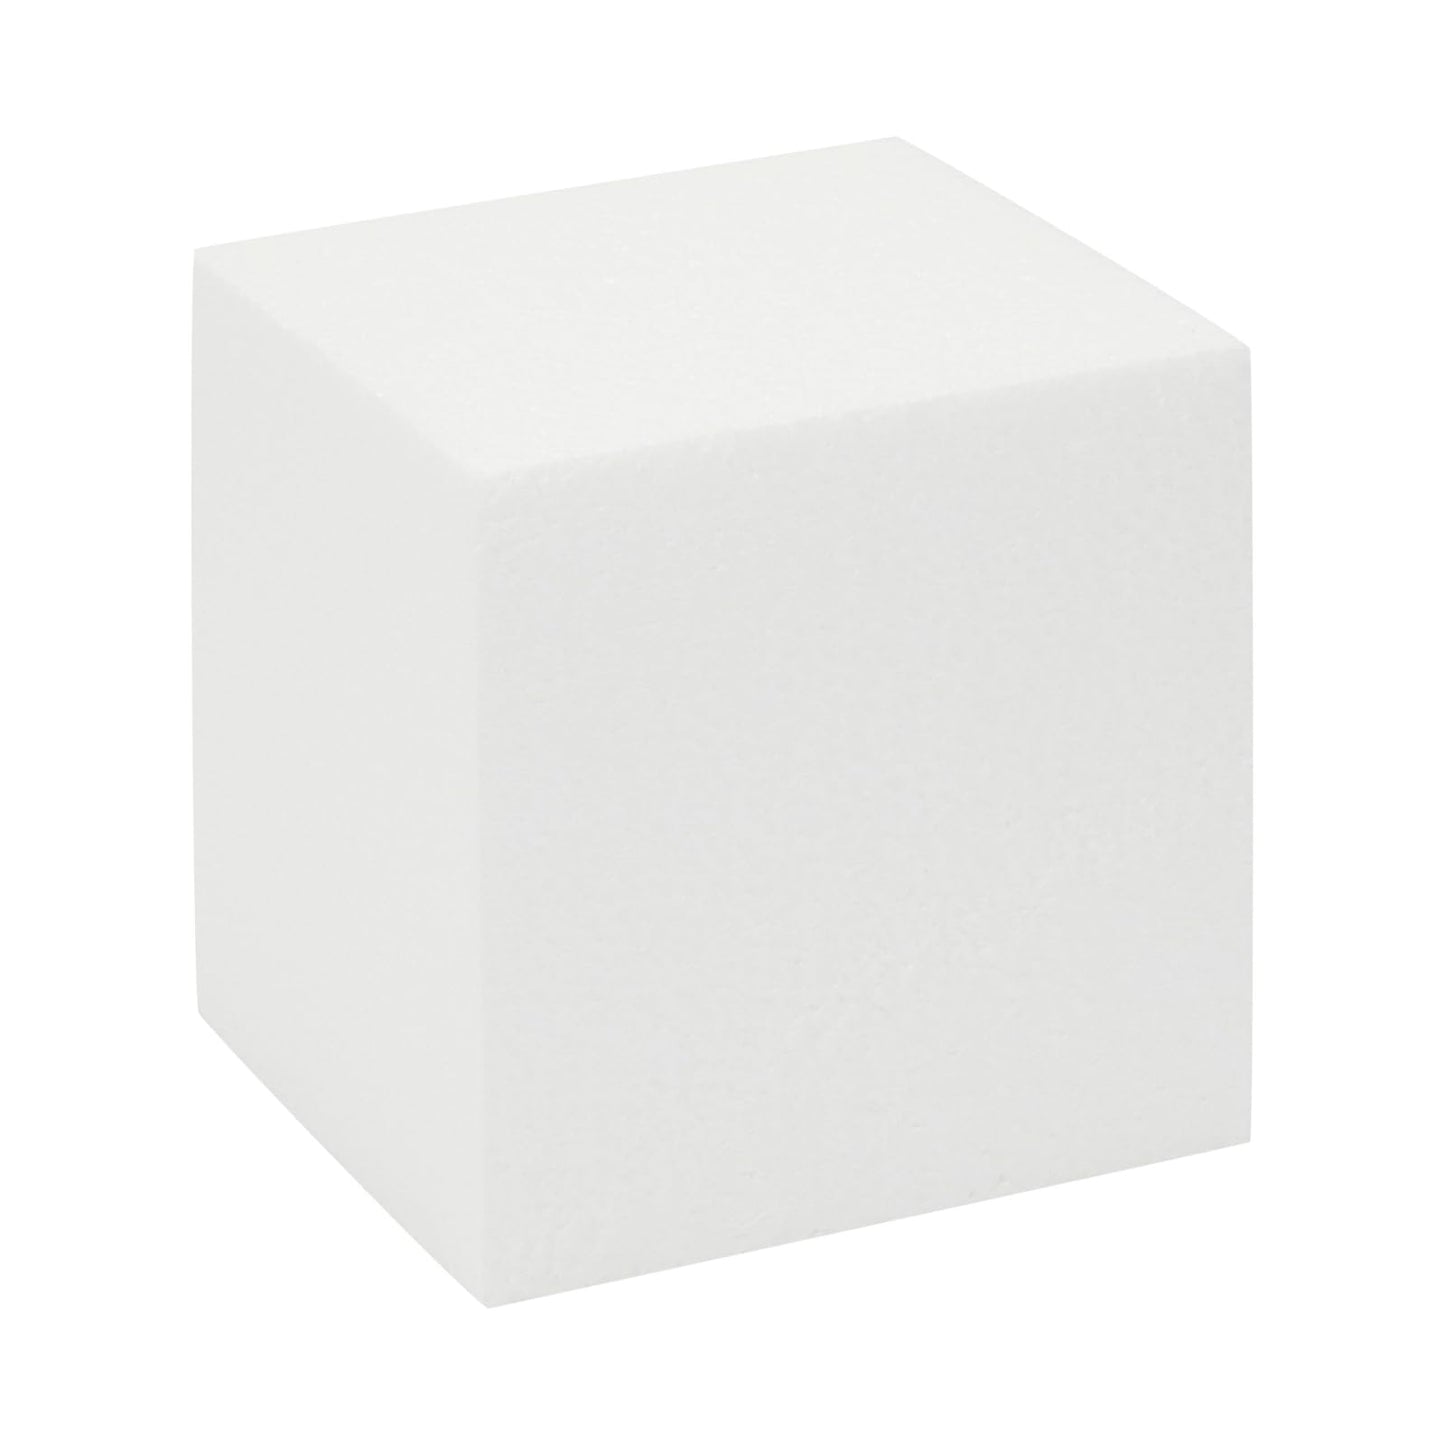 Juvale 6 Pack Foam Cube Squares for Crafts - Polystyrene Blocks for DIY, Floral Arrangements, Arts Supplies (4 x 4 x 4 in, White)